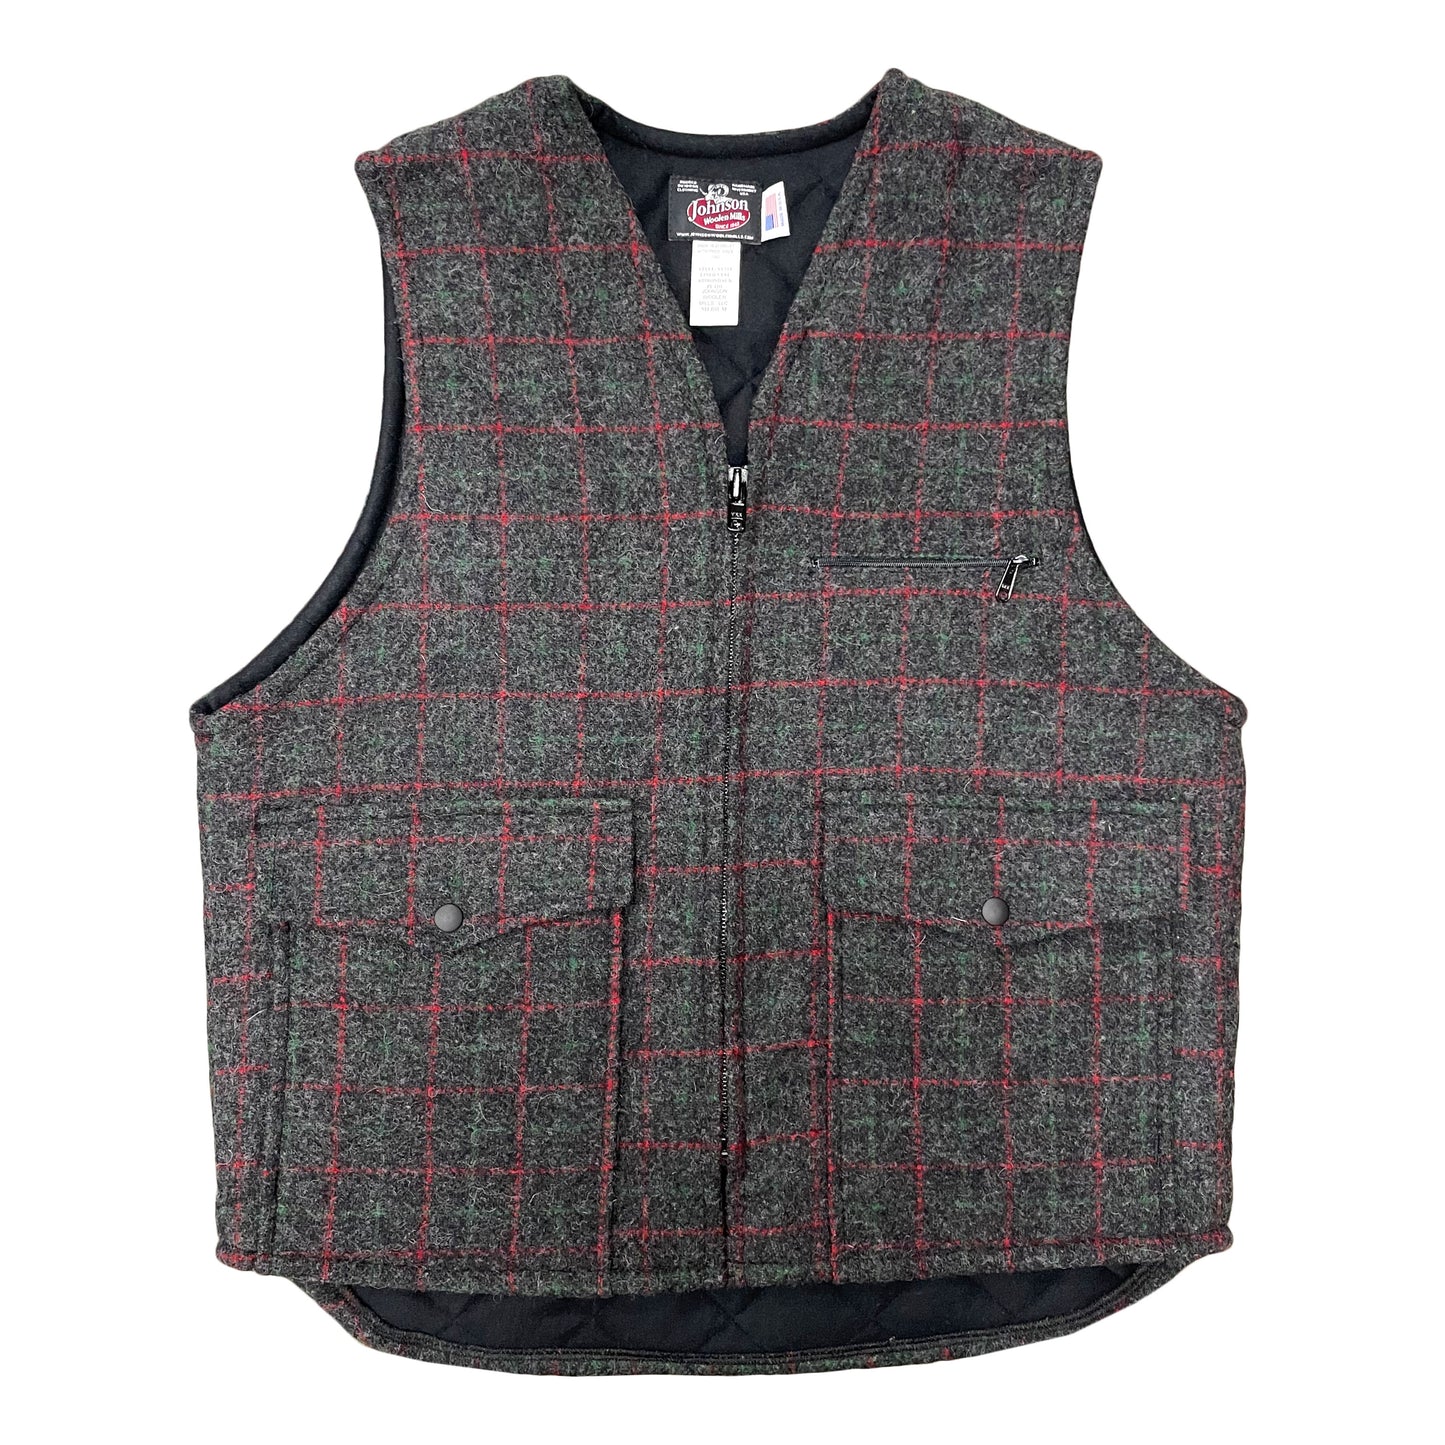 Vest with tricot lining, Adirondack, gray with red & green pin stripes, zipper front, two large pockets and chest pocket, front view